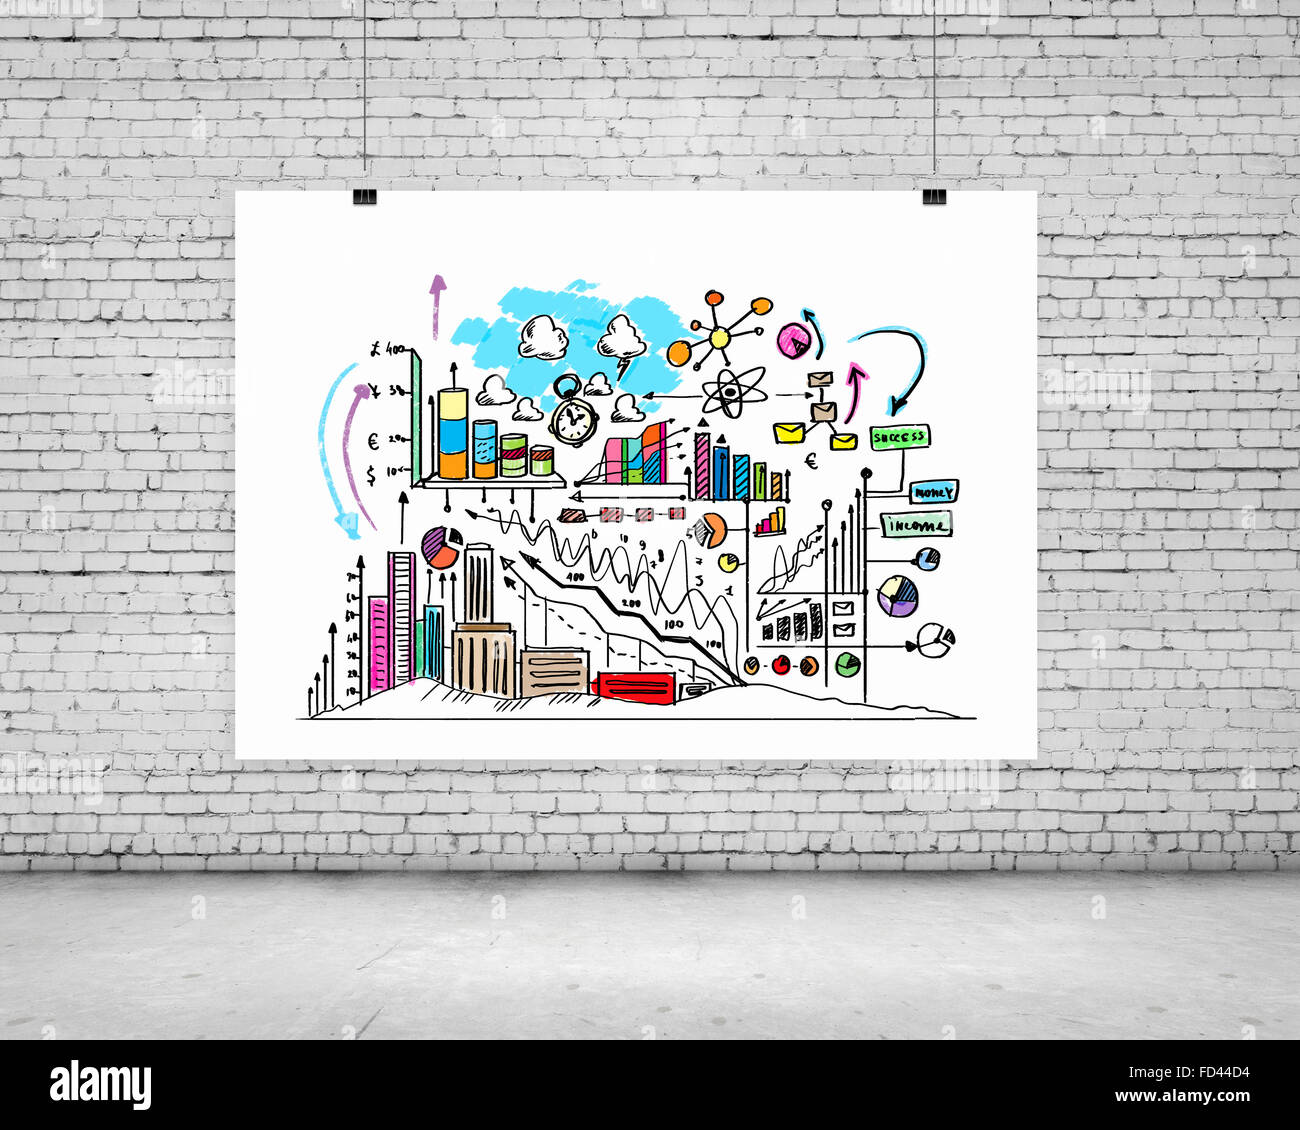 Hanging banner with business plan, graphics and diagrams Stock Photo